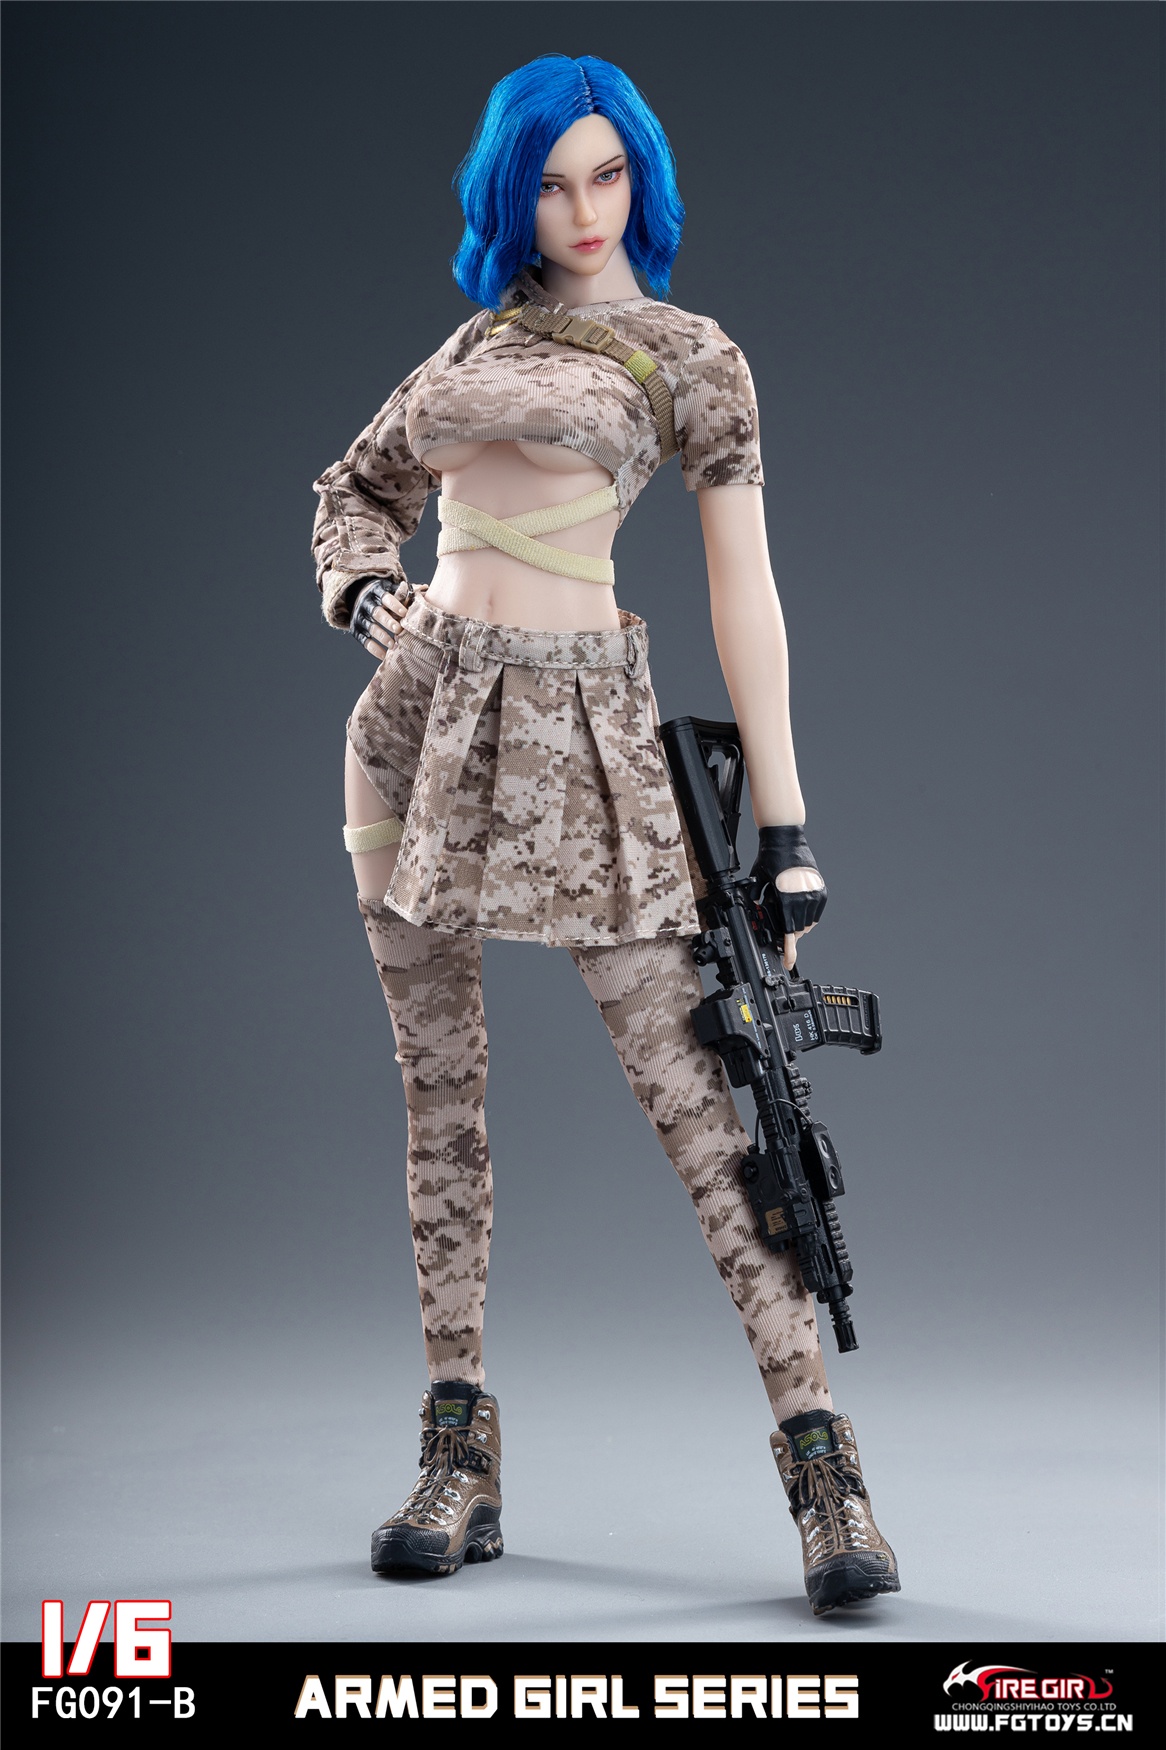 NEW PRODUCT: Fire Girl Toys - Soldier FG091 Armed Girls Series (3 styles A/B/C ) 12110